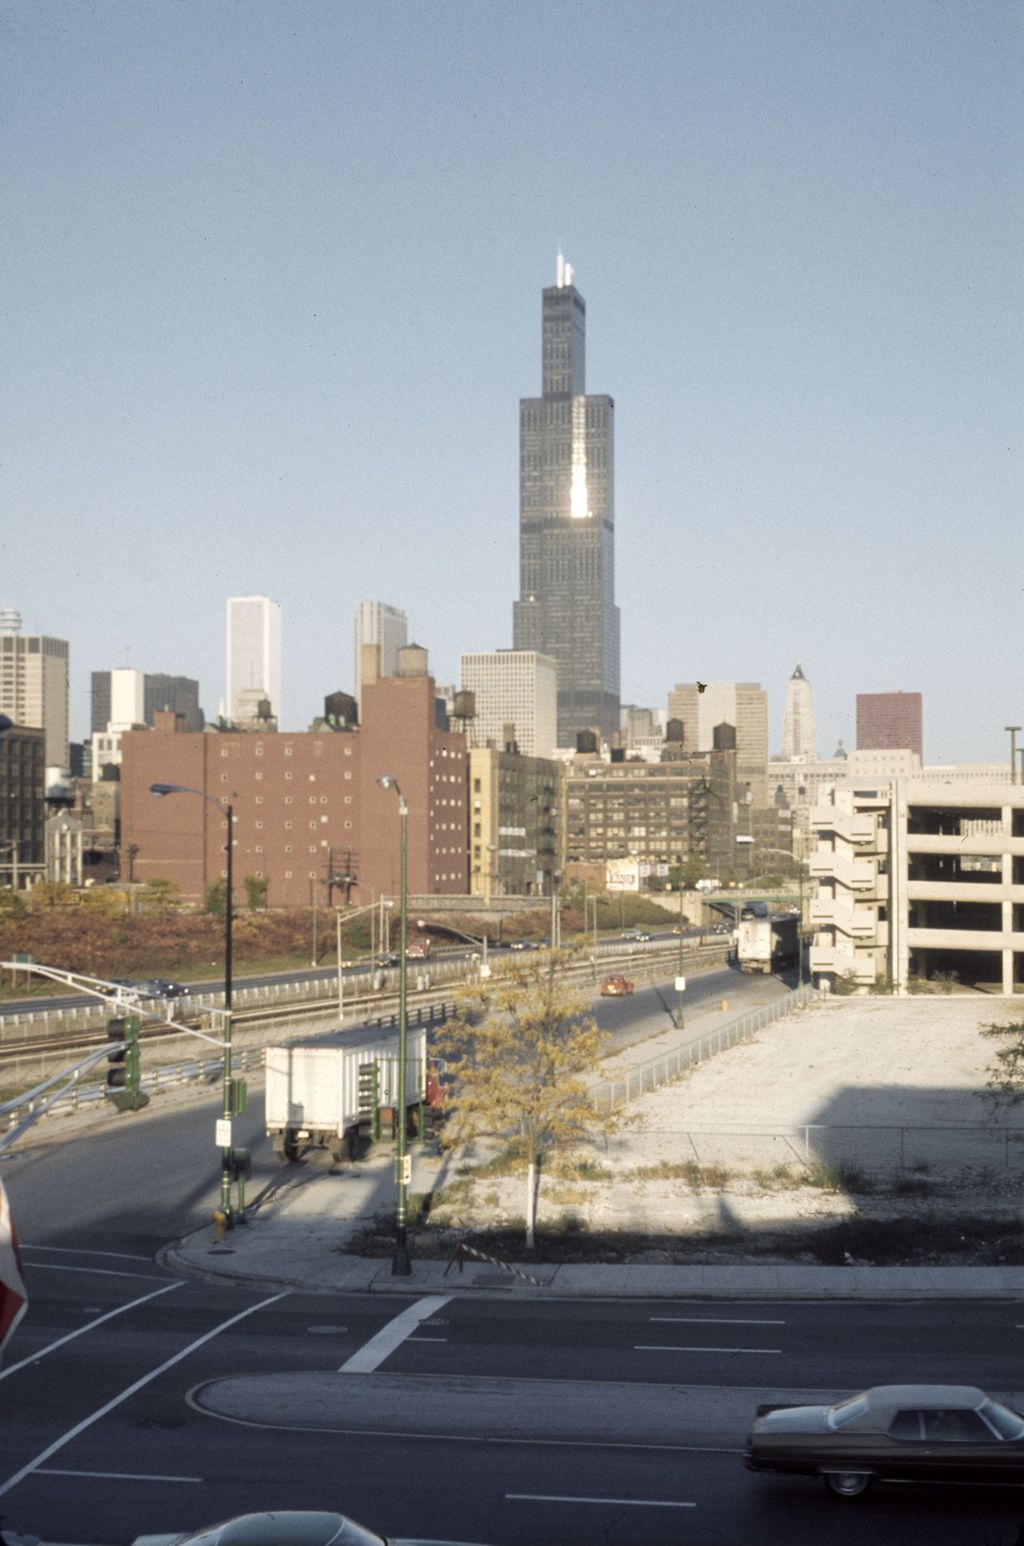 Miniature of Sears Tower from the Near West side